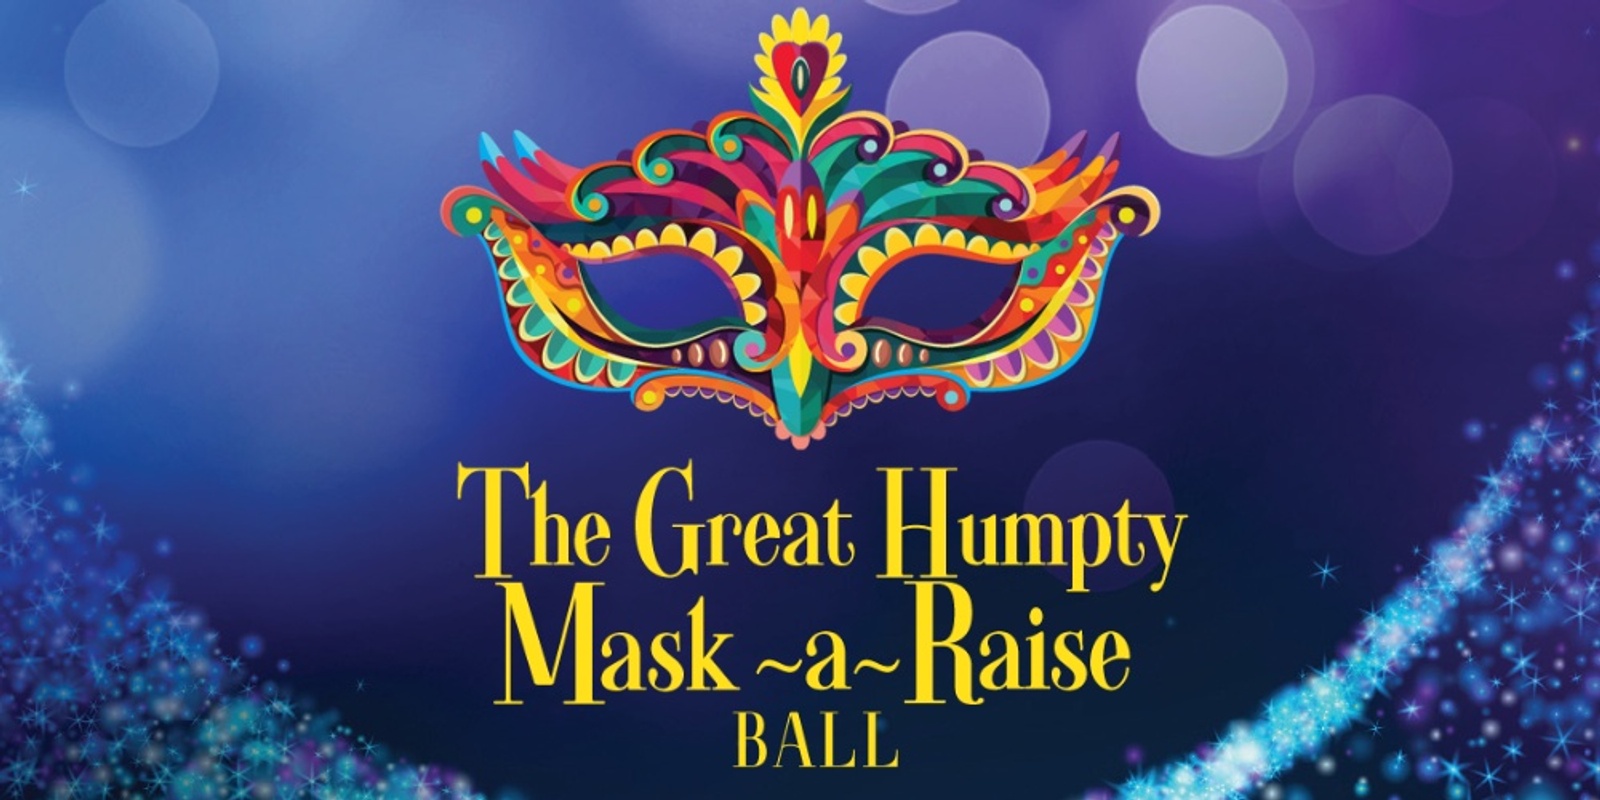 Banner image for The Great Humpty Ball Sydney